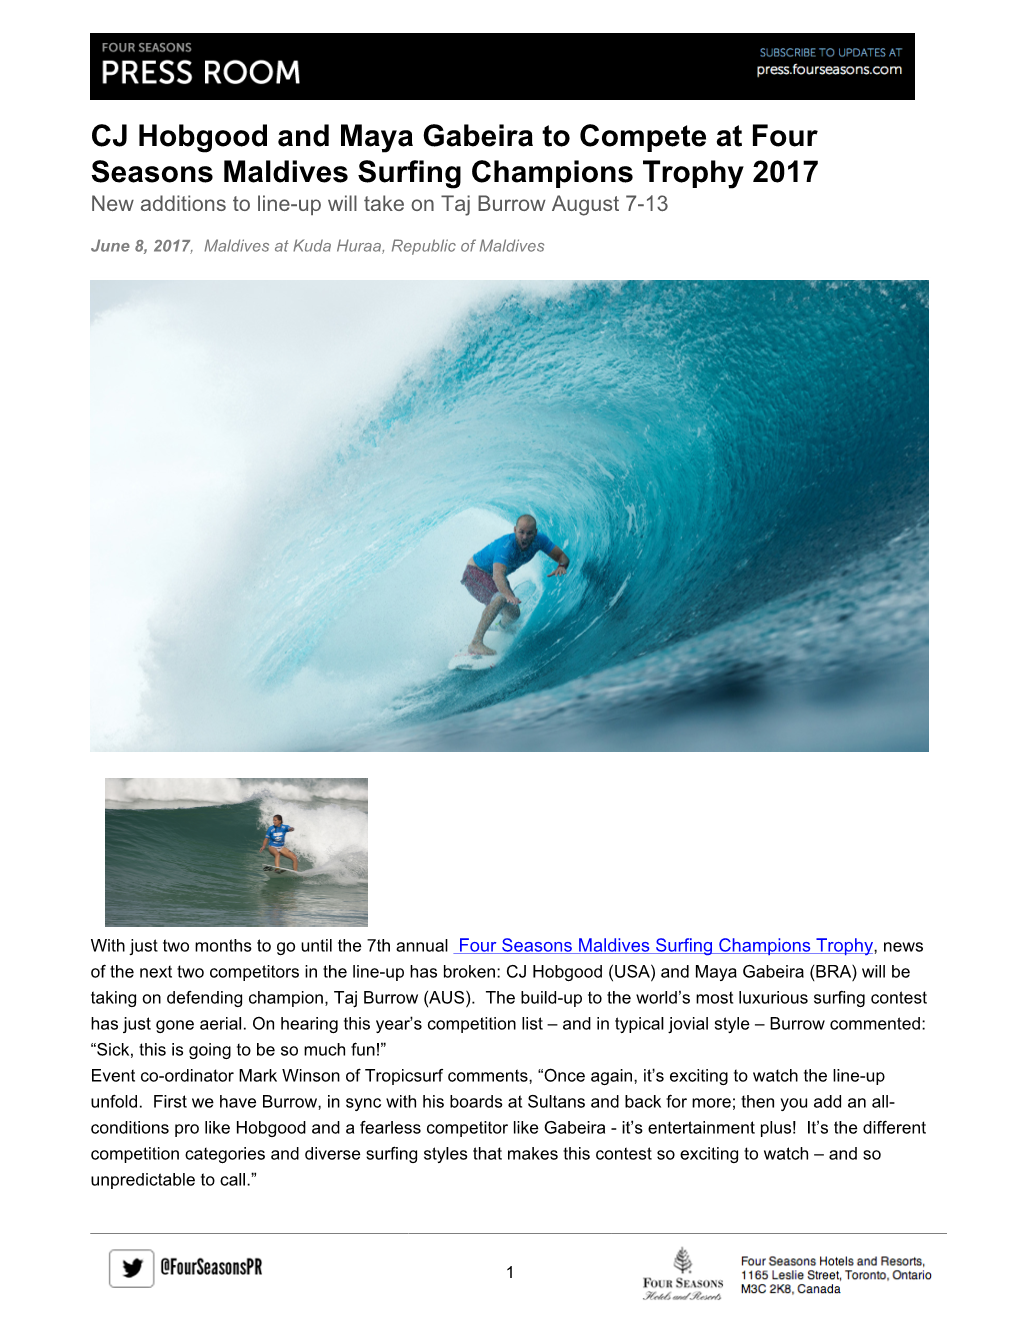 CJ Hobgood and Maya Gabeira to Compete at Four Seasons Maldives Surfing Champions Trophy 2017 New Additions to Line-Up Will Take on Taj Burrow August 7-13